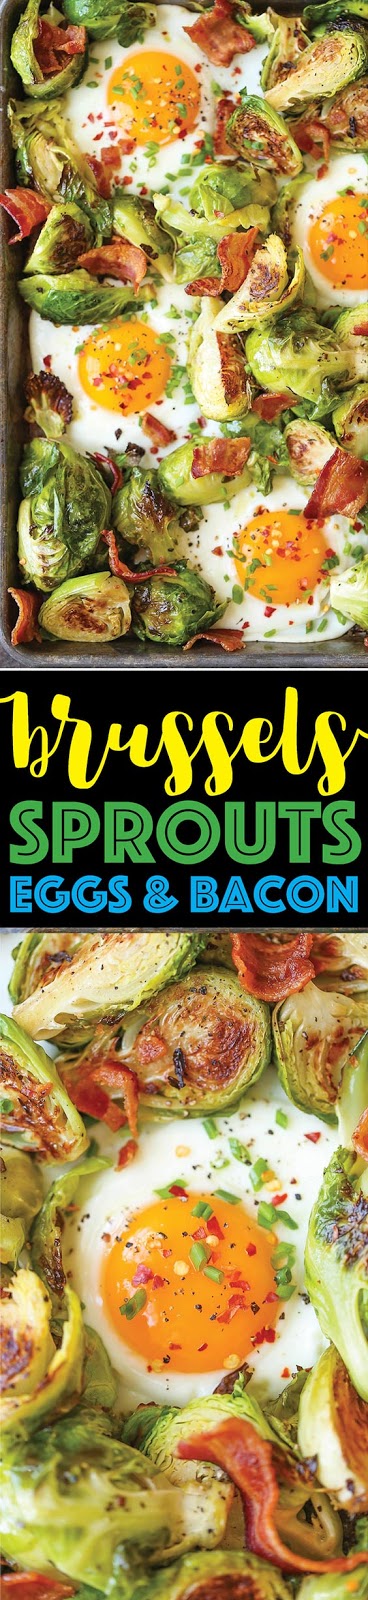 Brussels Sprouts, Eggs and Bacon